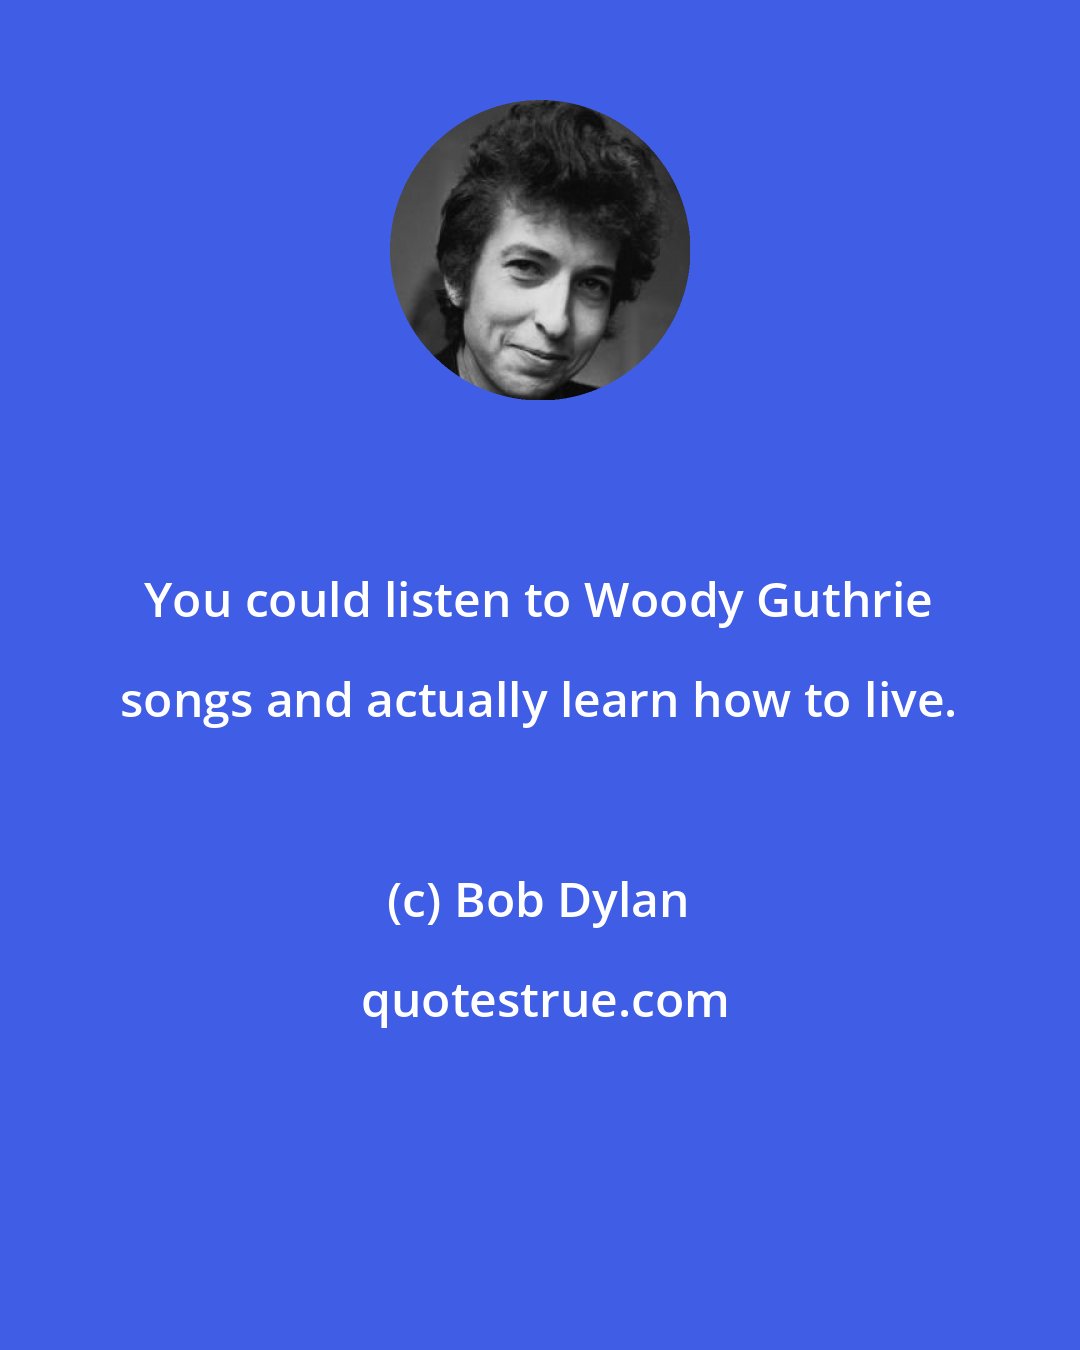 Bob Dylan: You could listen to Woody Guthrie songs and actually learn how to live.